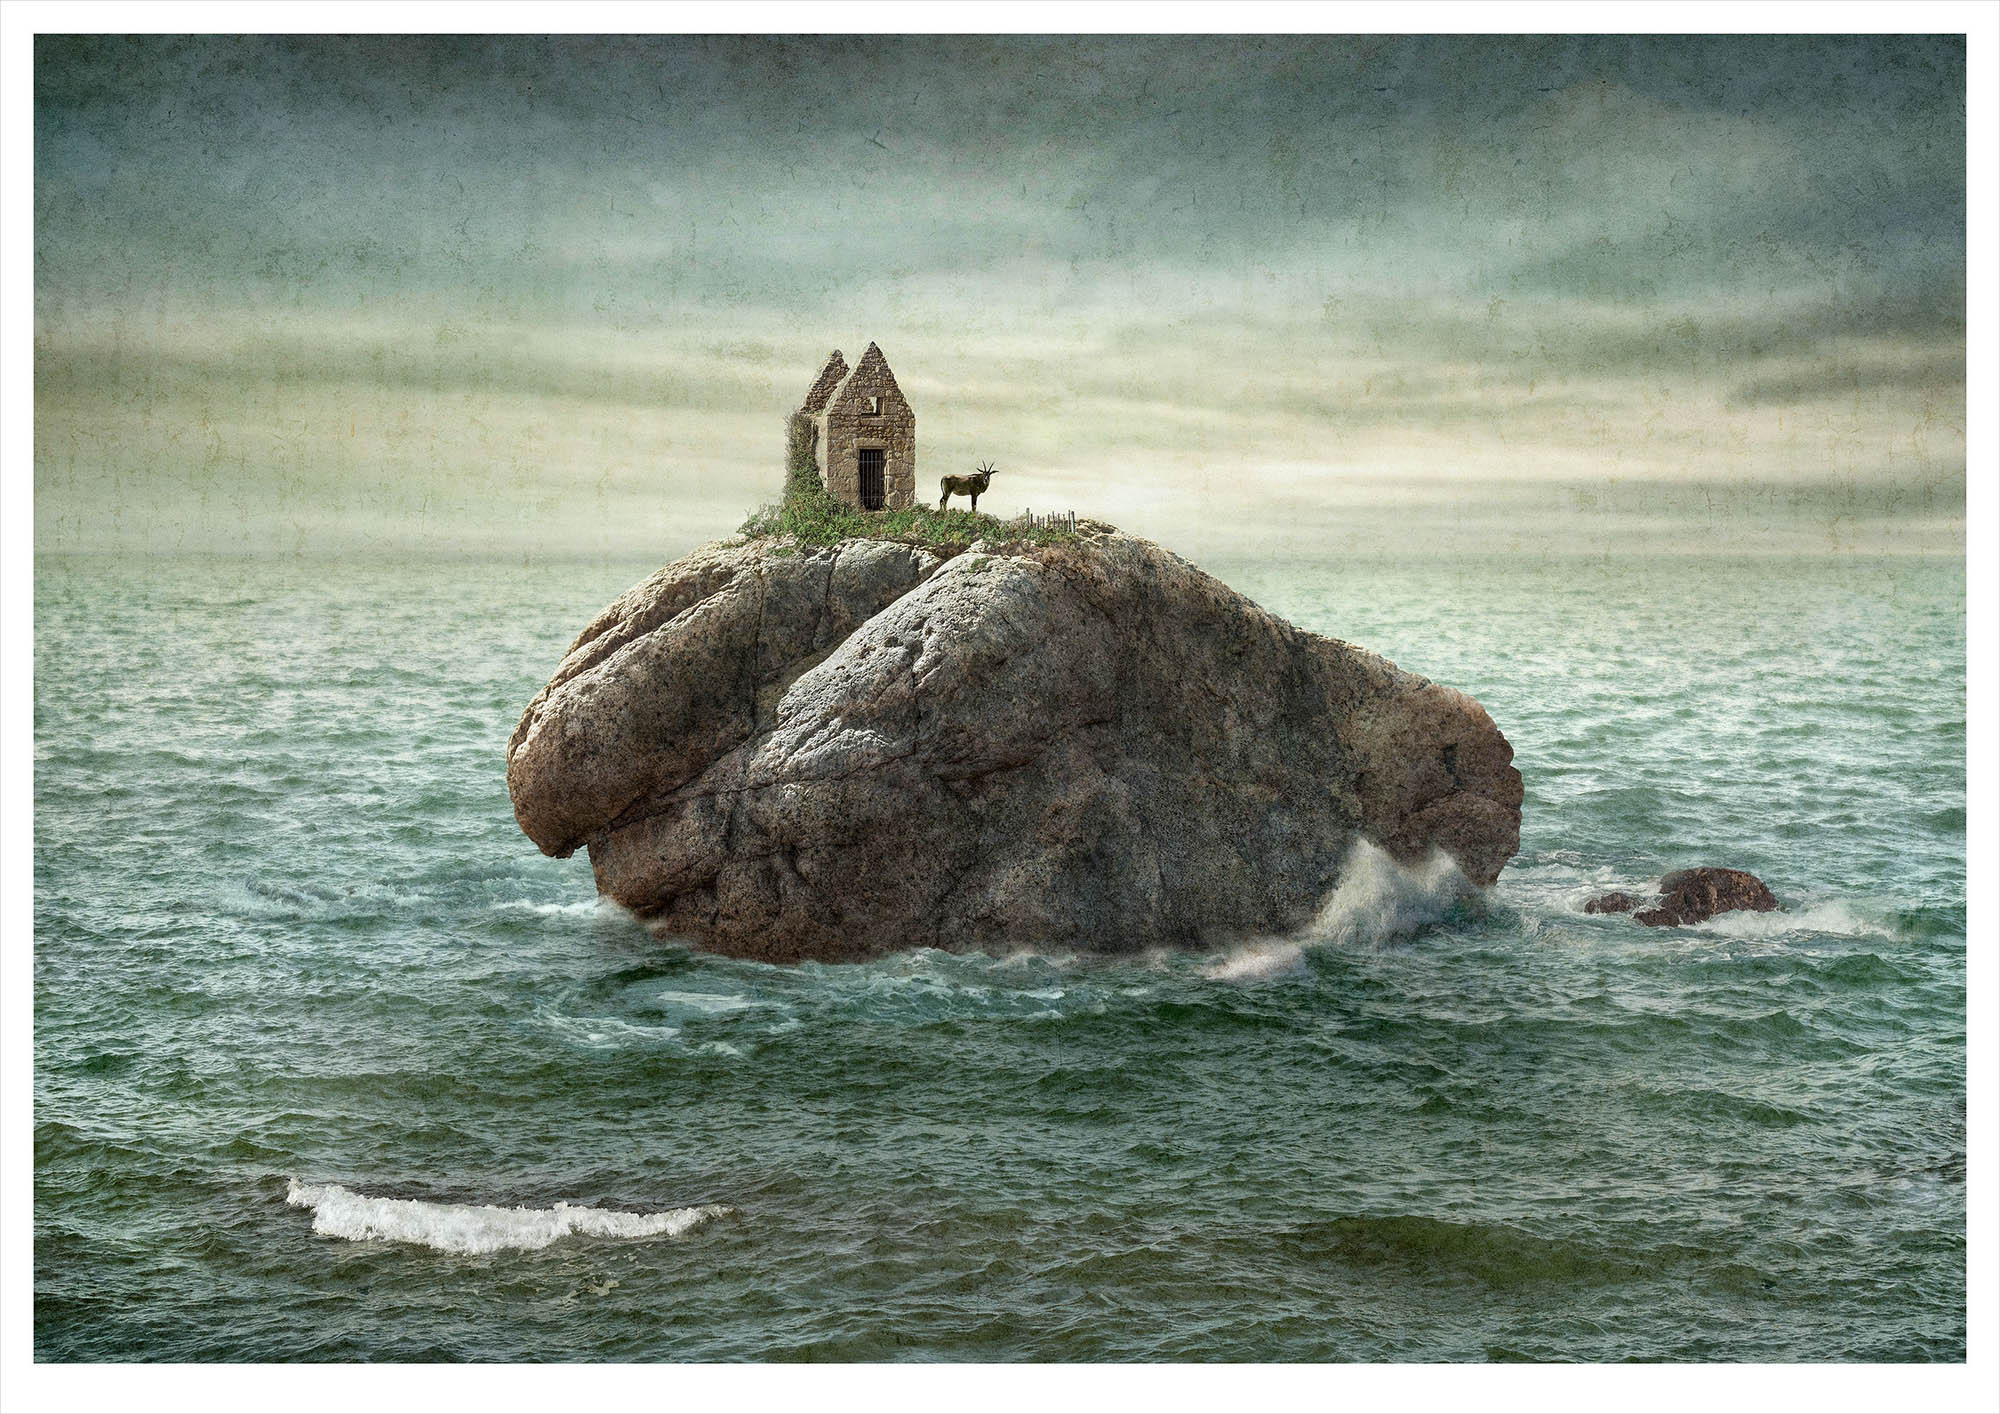 Solitary small island in ocean with ramshackle stone building and horned antelope looking to camera